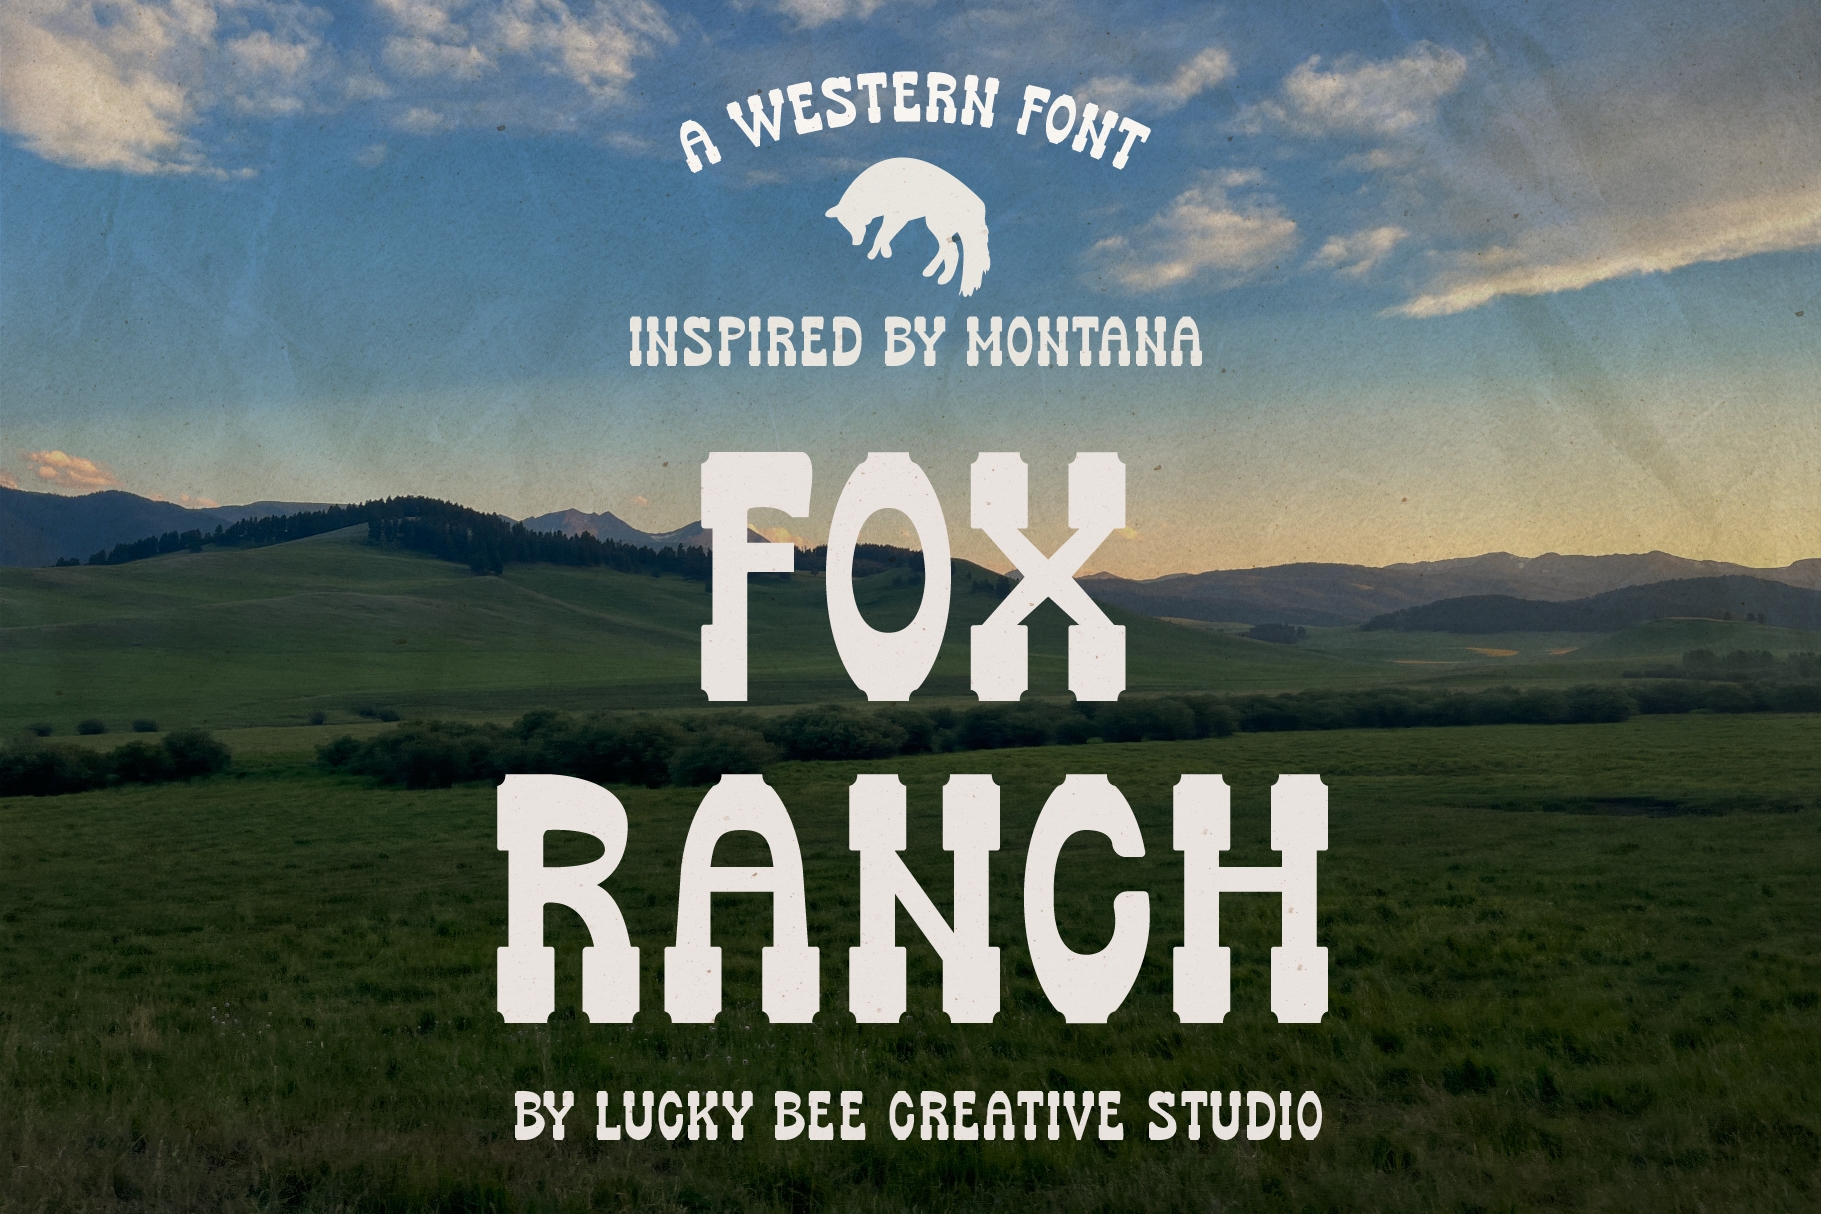 Introducing Fox Ranch a retro western font inspired by Montana